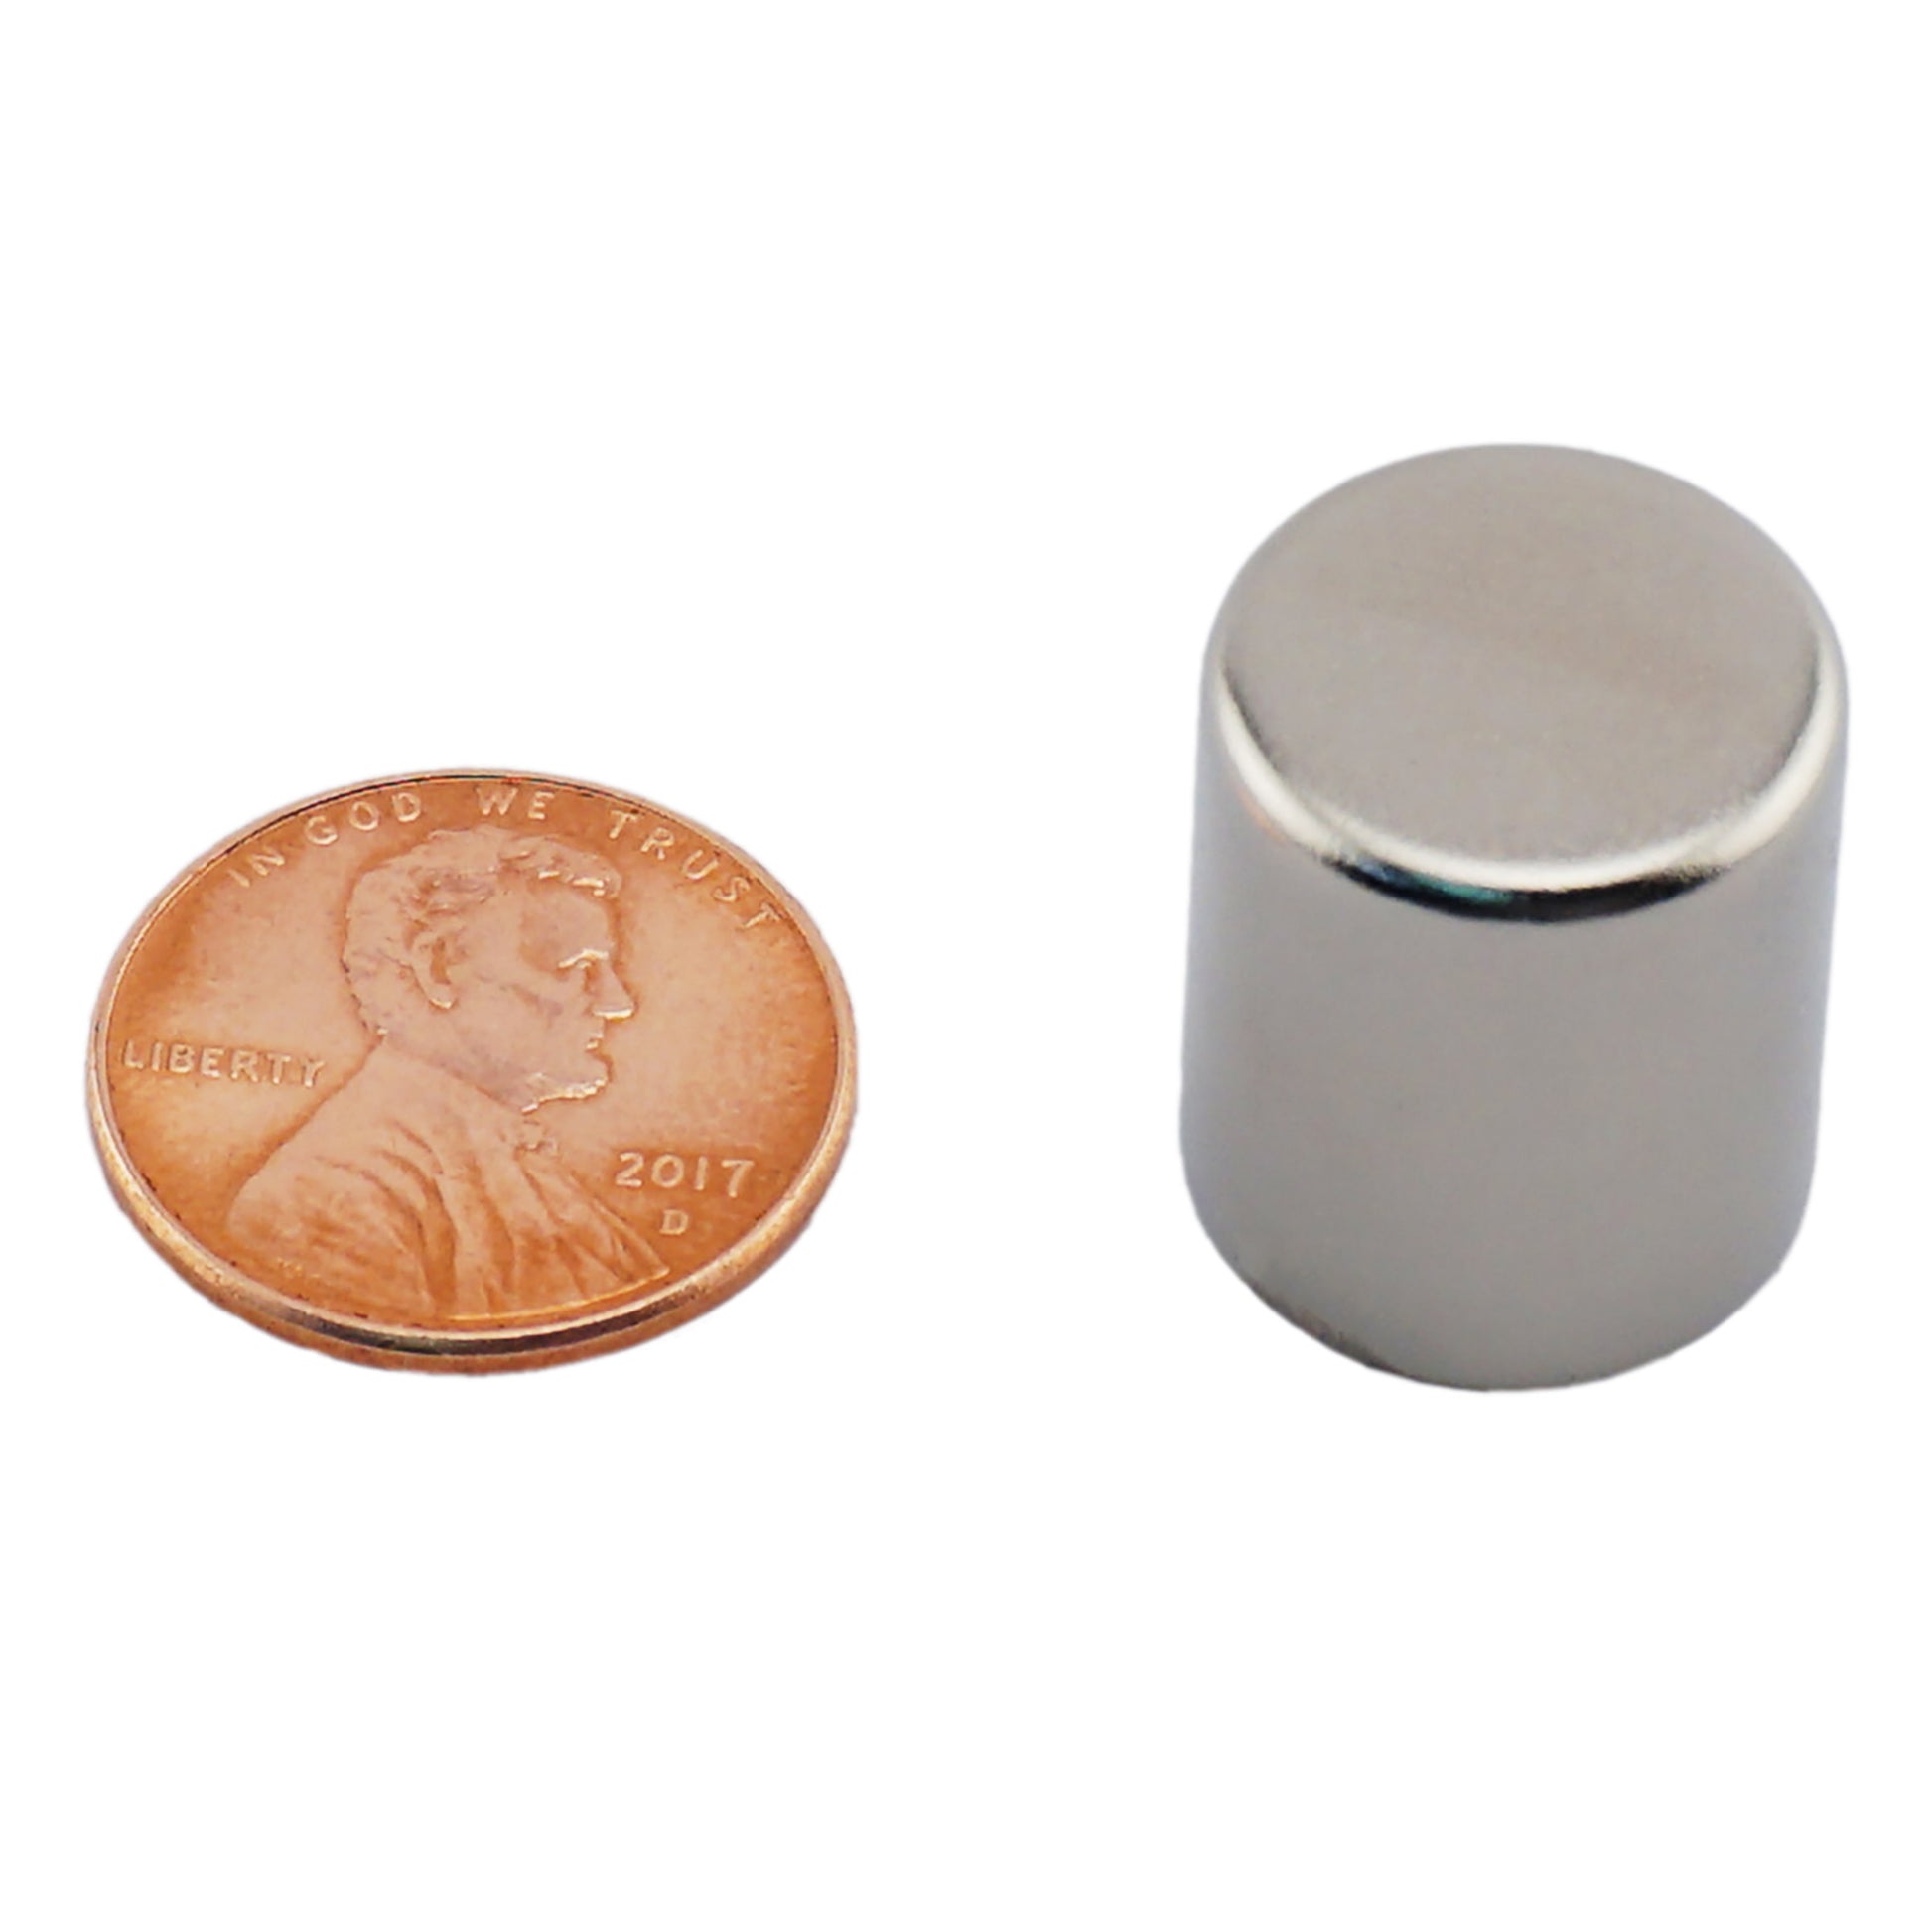 Load image into Gallery viewer, ND006212N Neodymium Disc Magnet - Compared to Penny for Size Reference